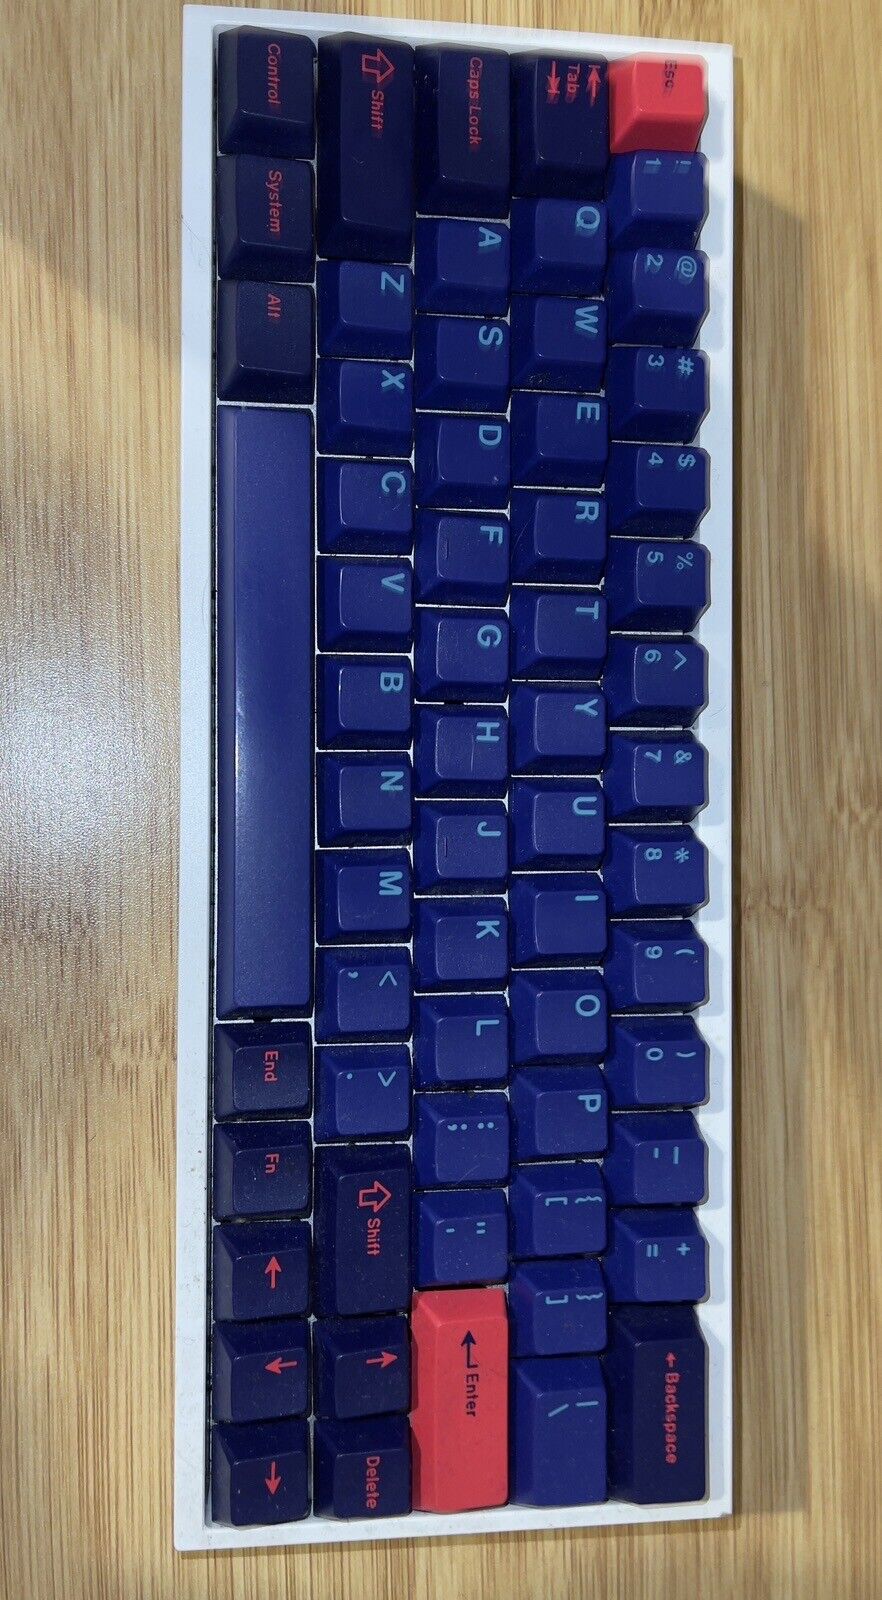 Custom built 60% Mechanical Keyboard, Gatreon Black Switches, and GMK Laser 2